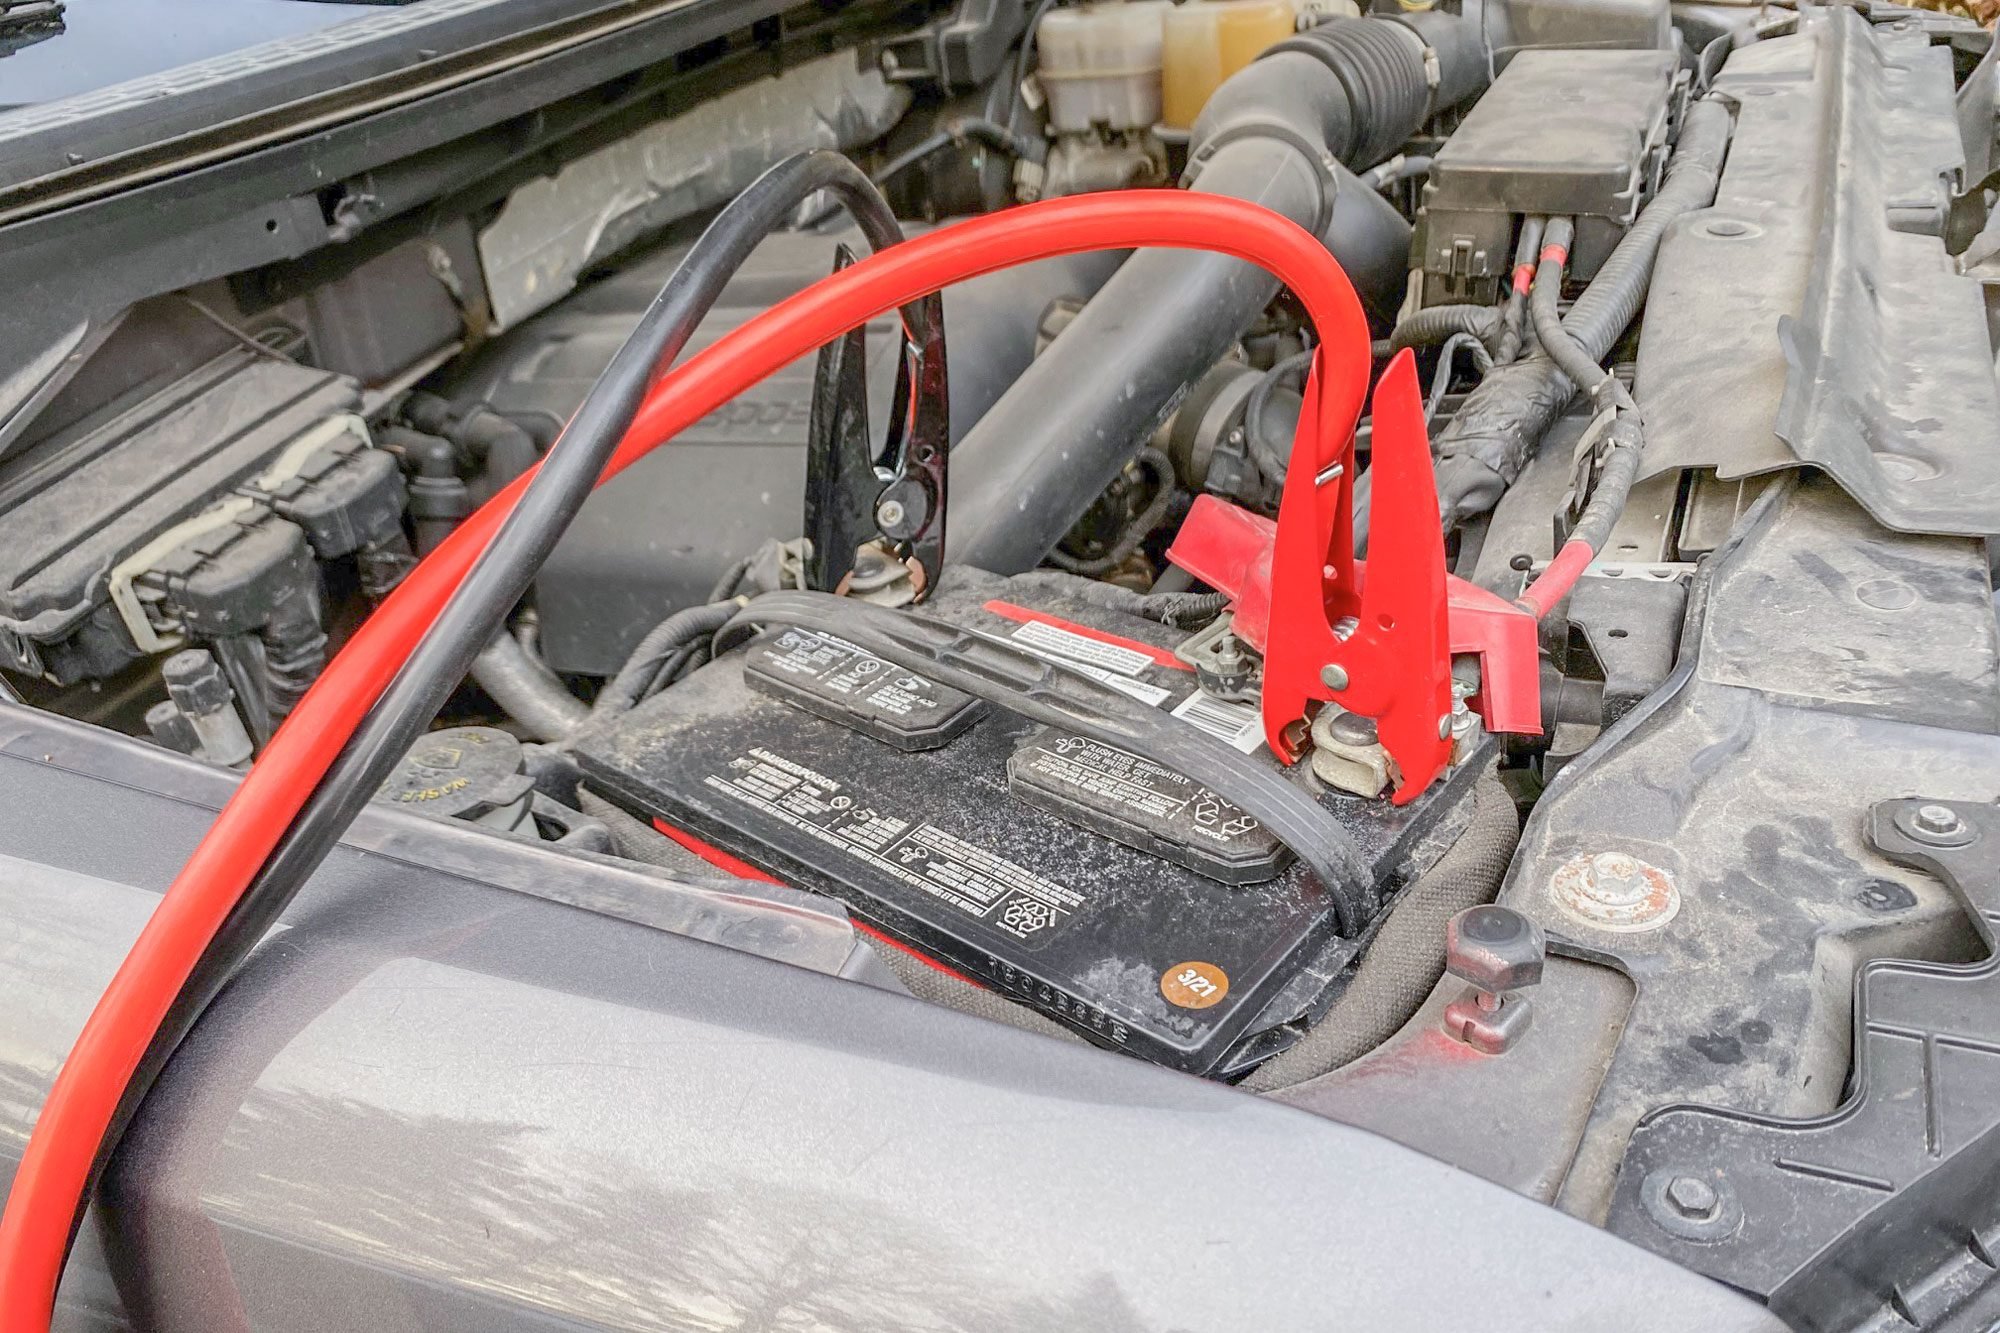 The Do's and Don'ts of Jumpstarting a Car